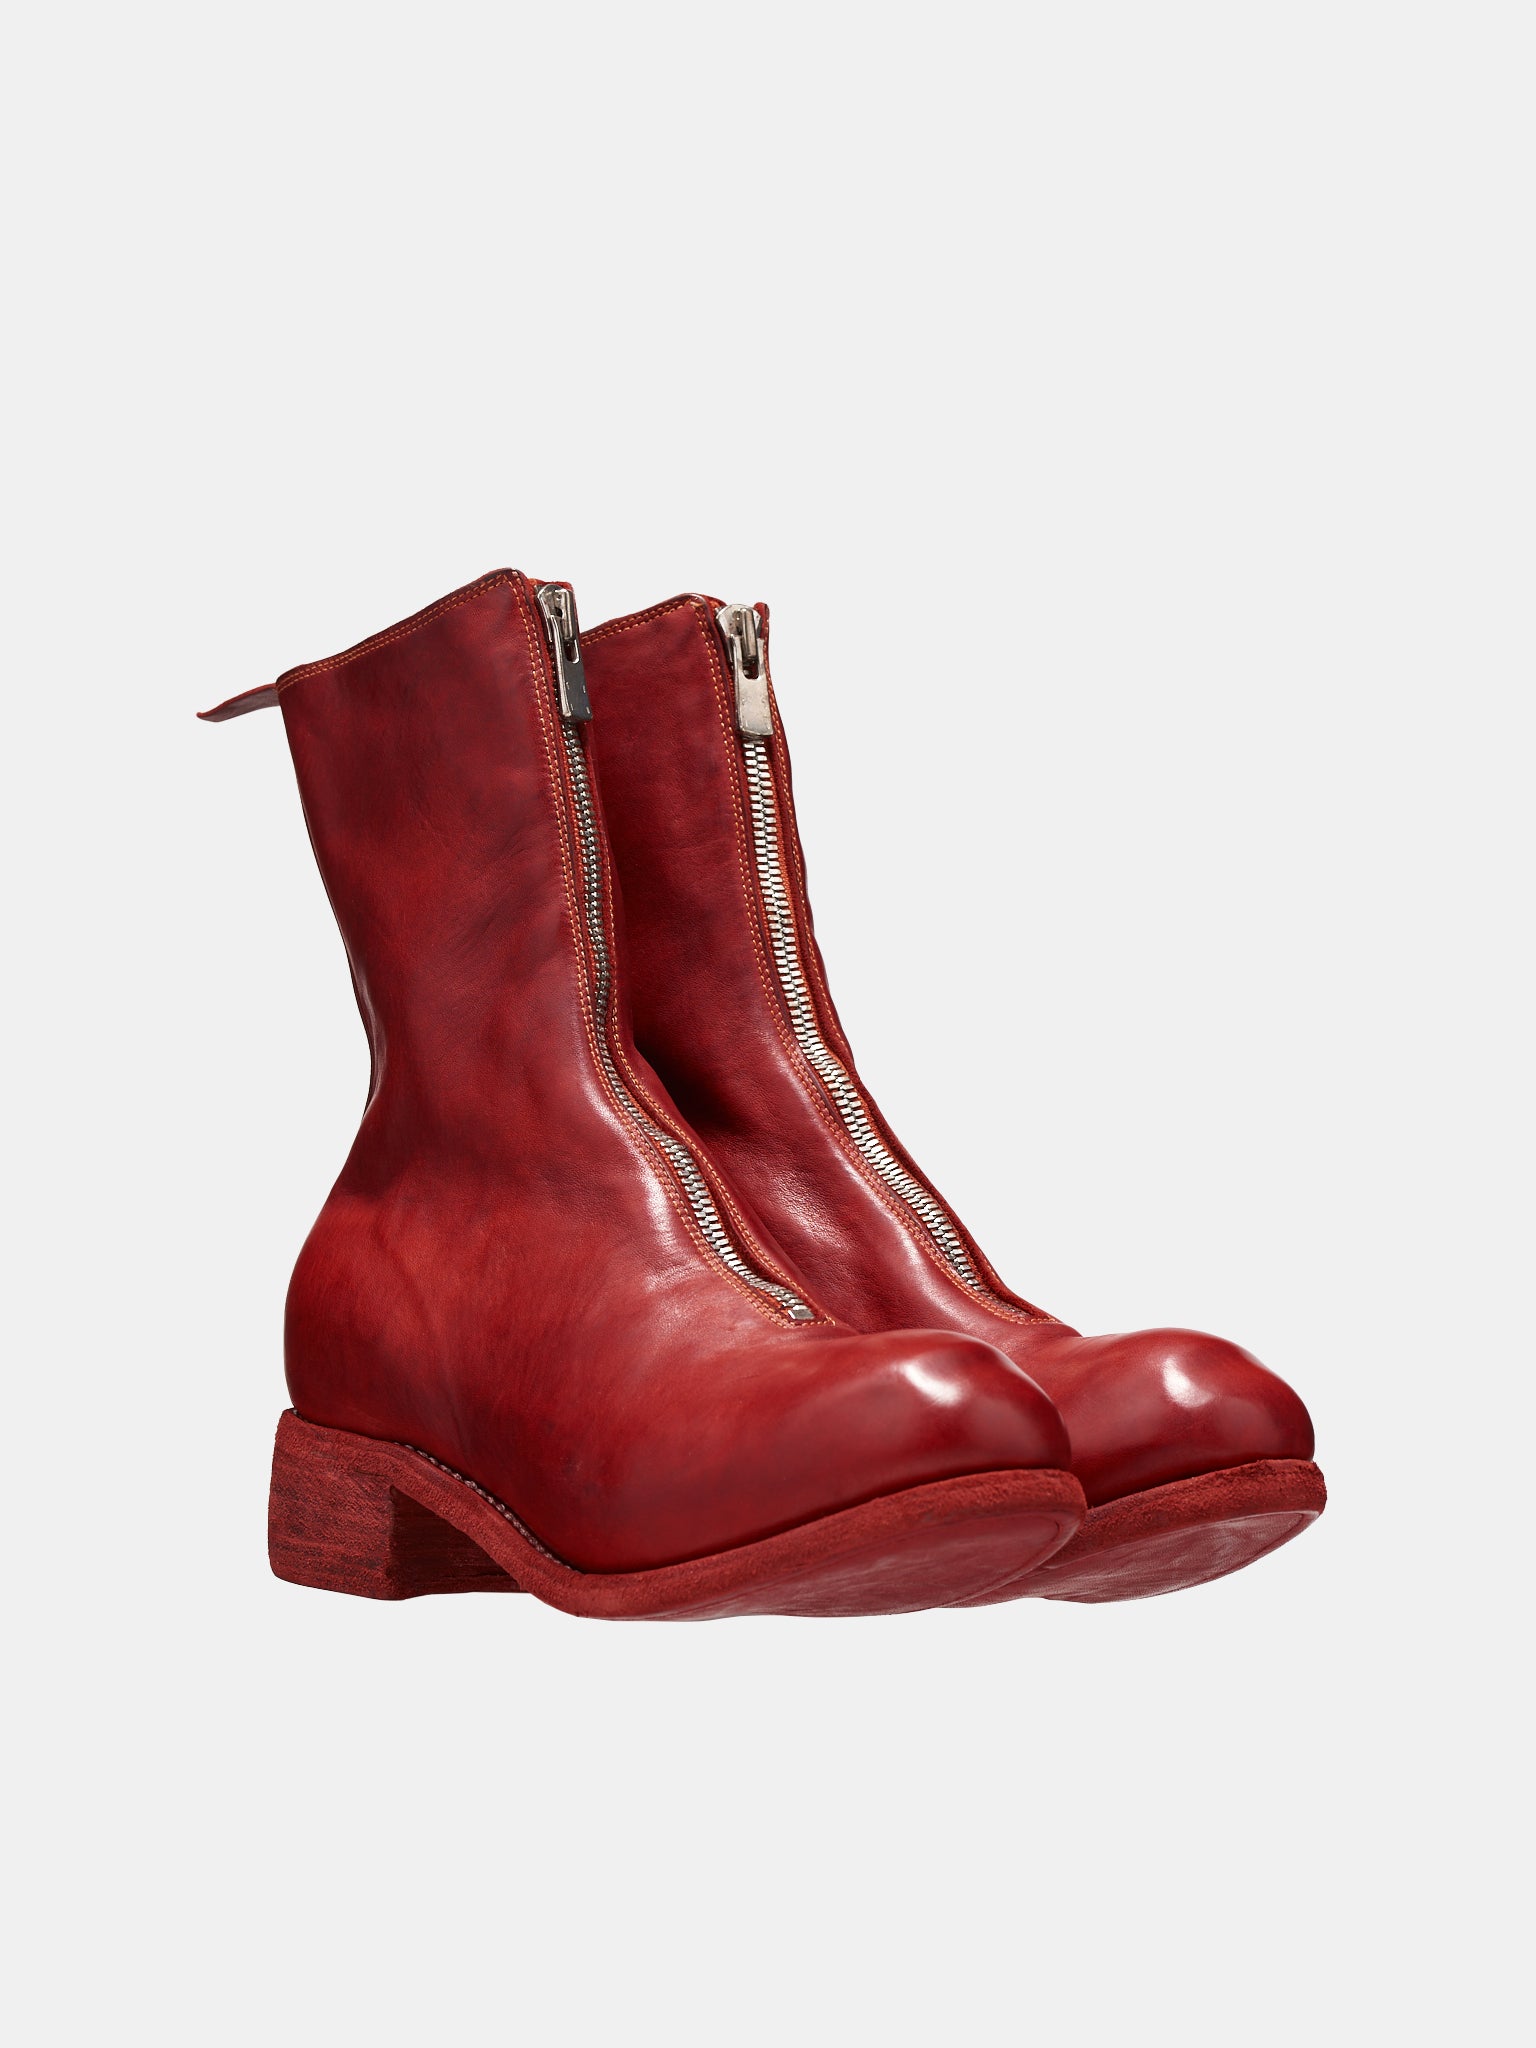 PL2 Horse Leather Boots (PL2-HORSE-FULL-GRAIN-RED)